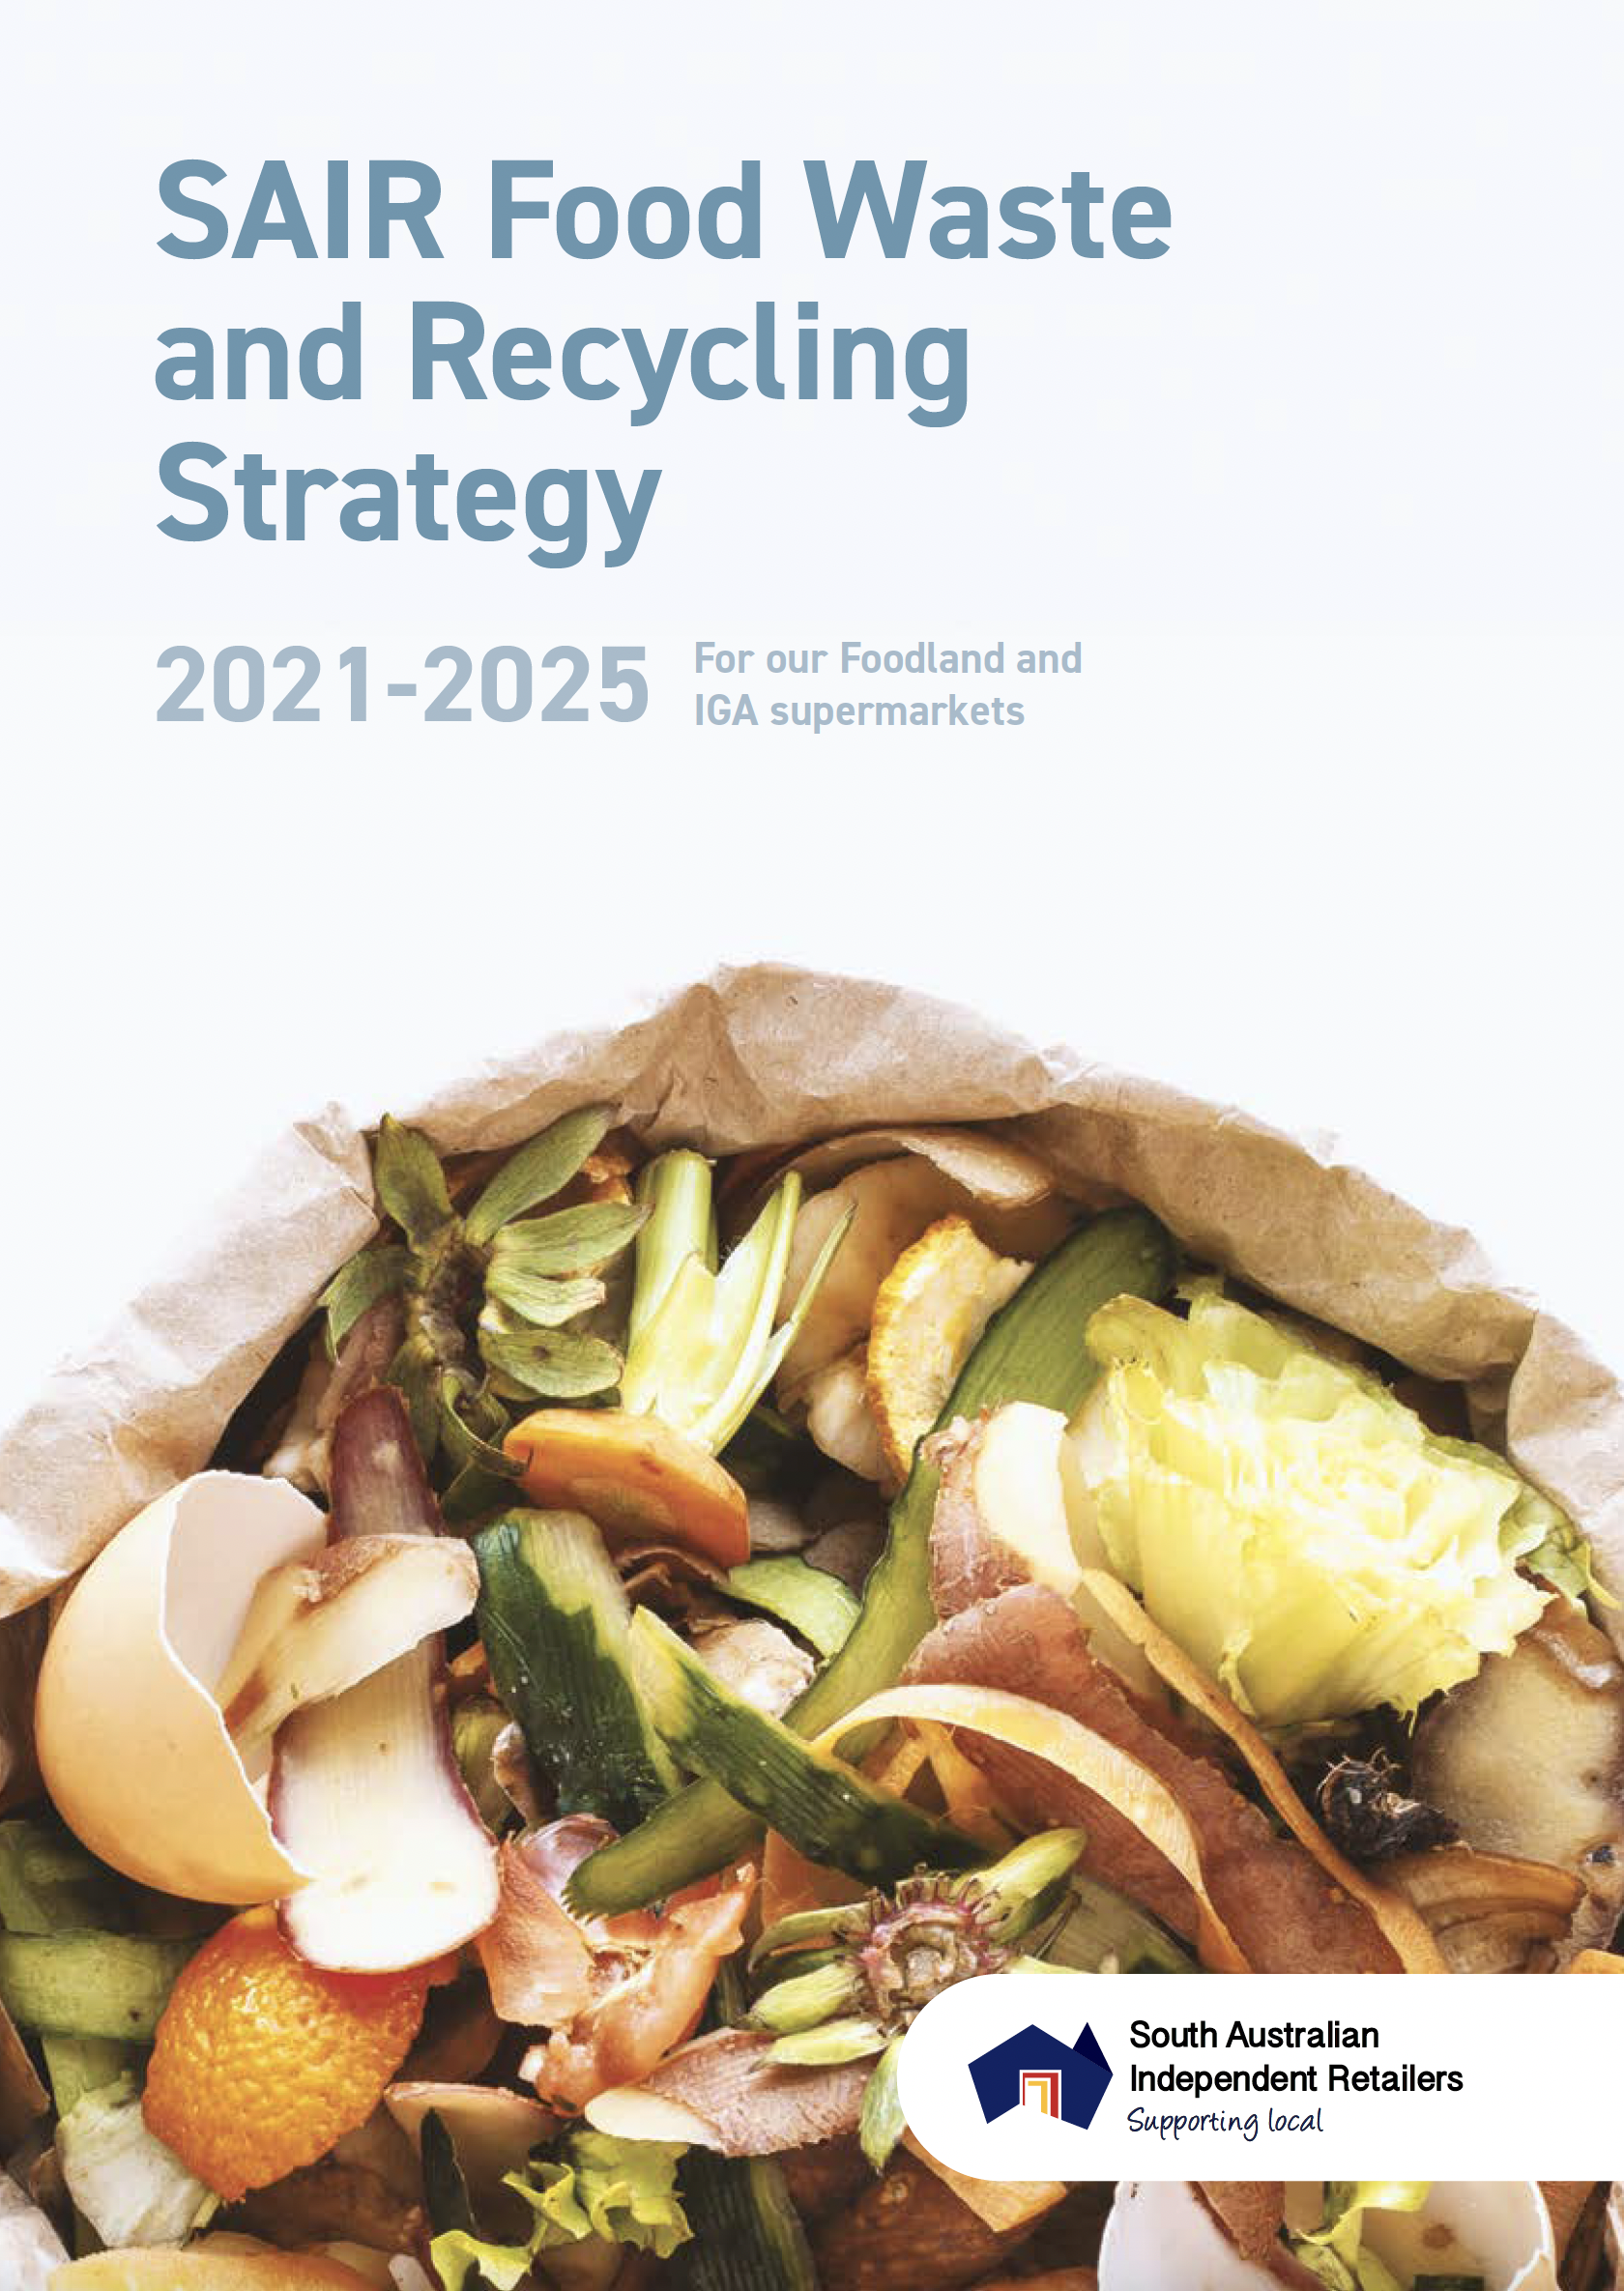 SAIR Food Waste and Recycling Strategy 2021-2025